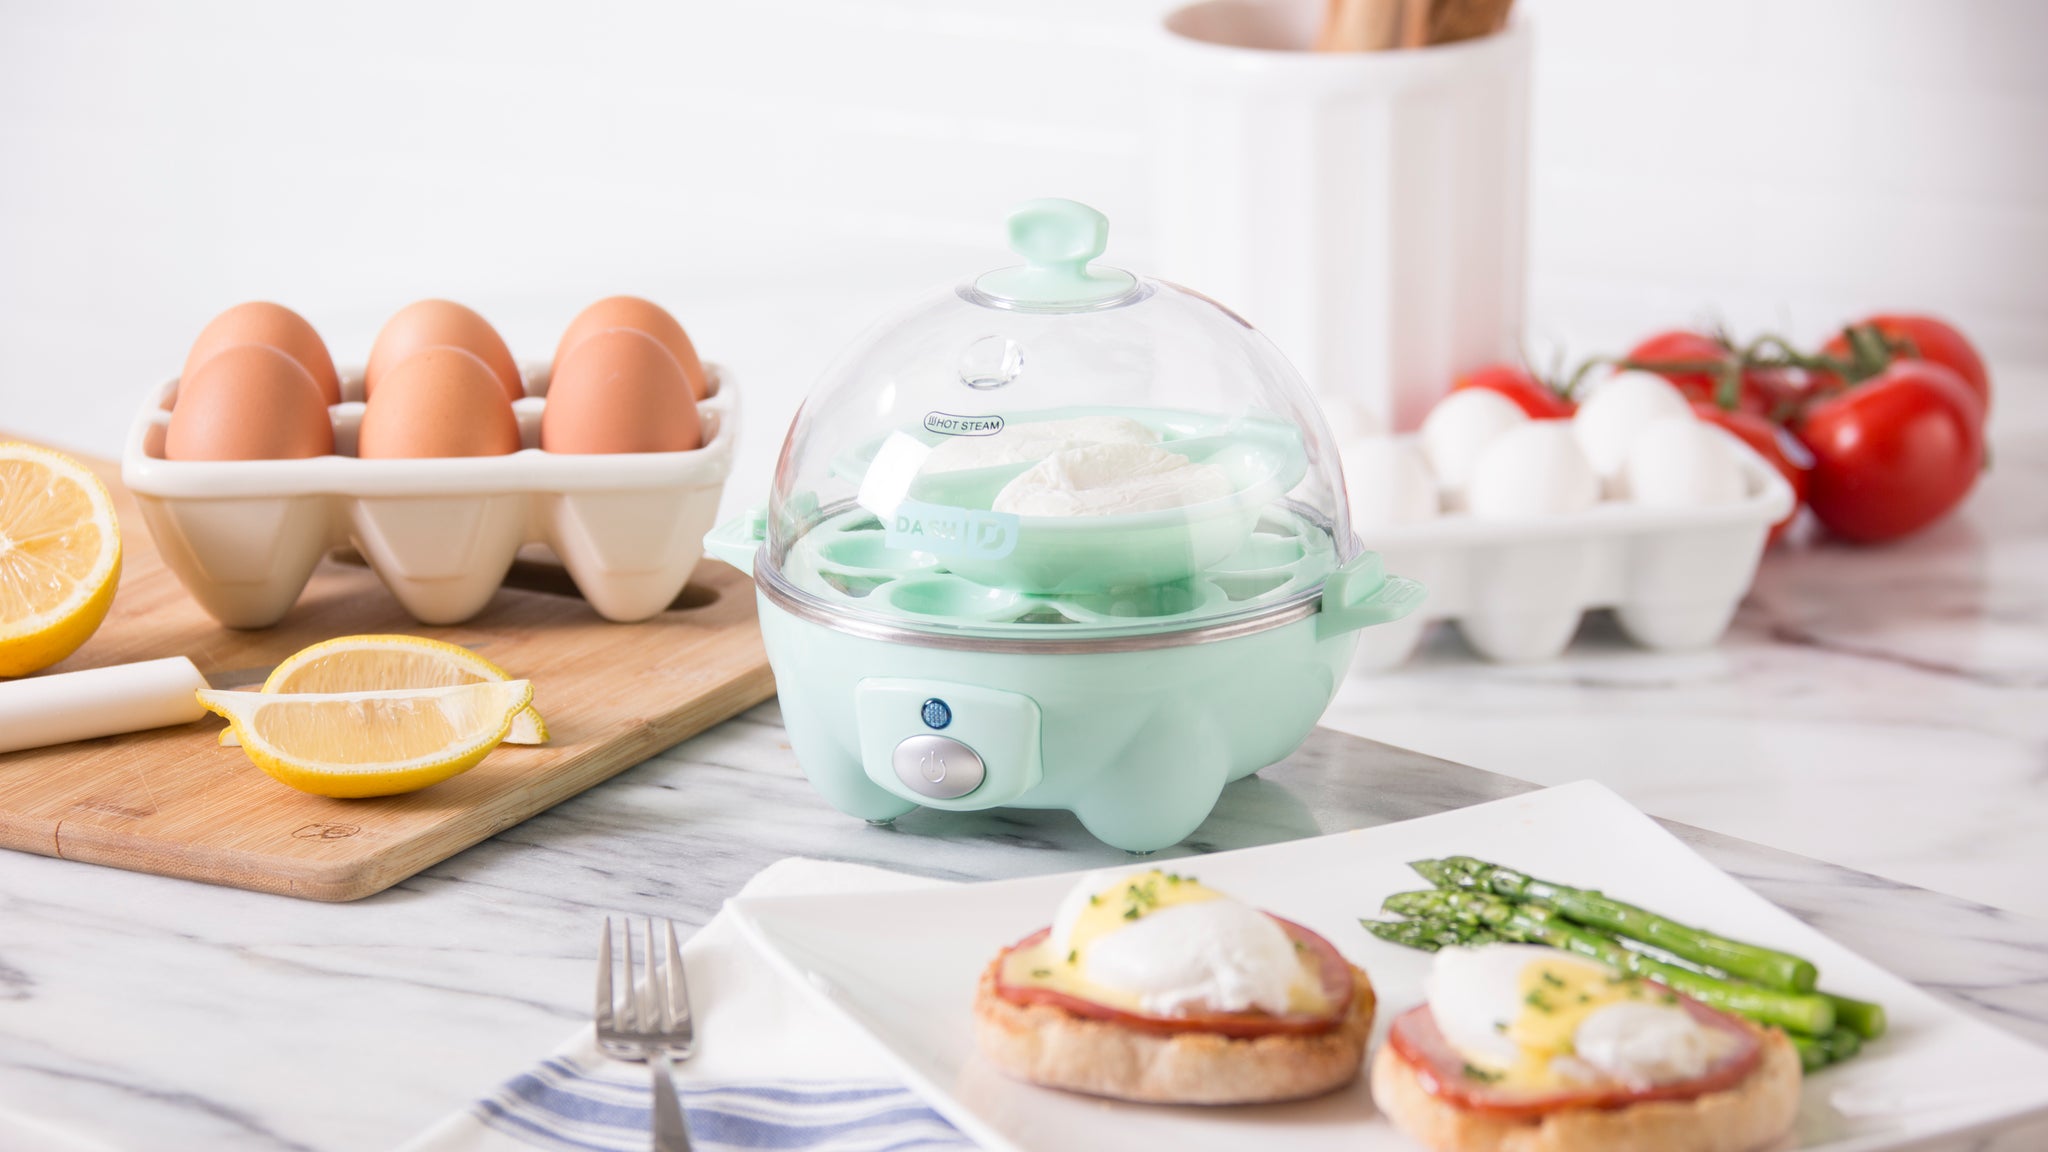 10 Capacity, Egg Cooker For Hard Boiled, Poached, Scrambled Eggs